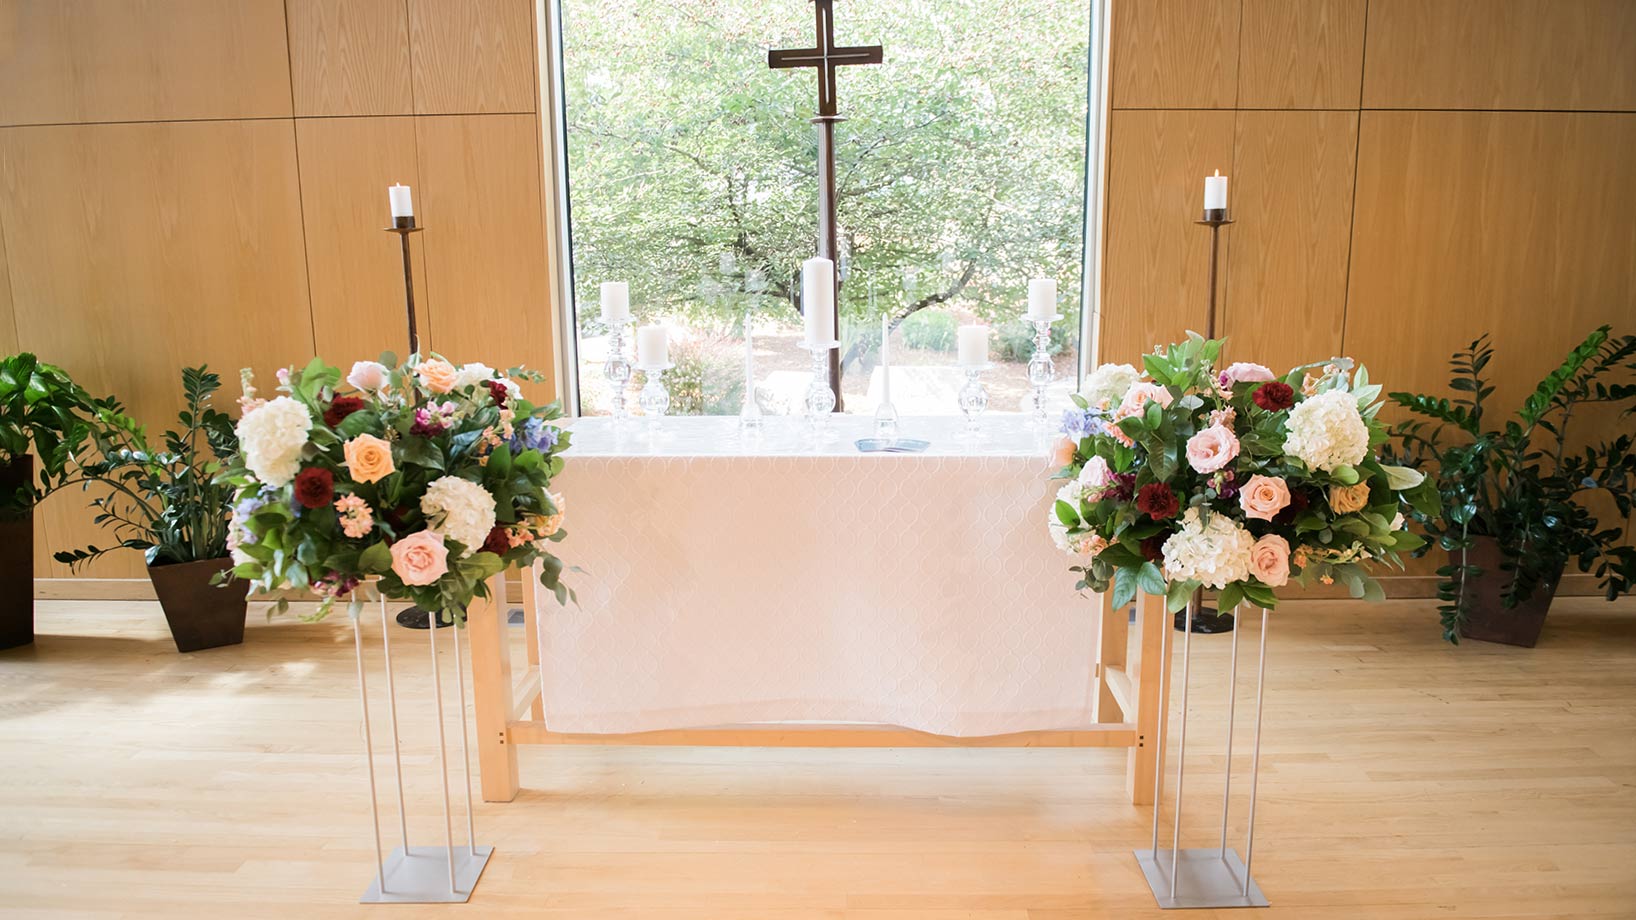 The Chapel altar with wedding flowers